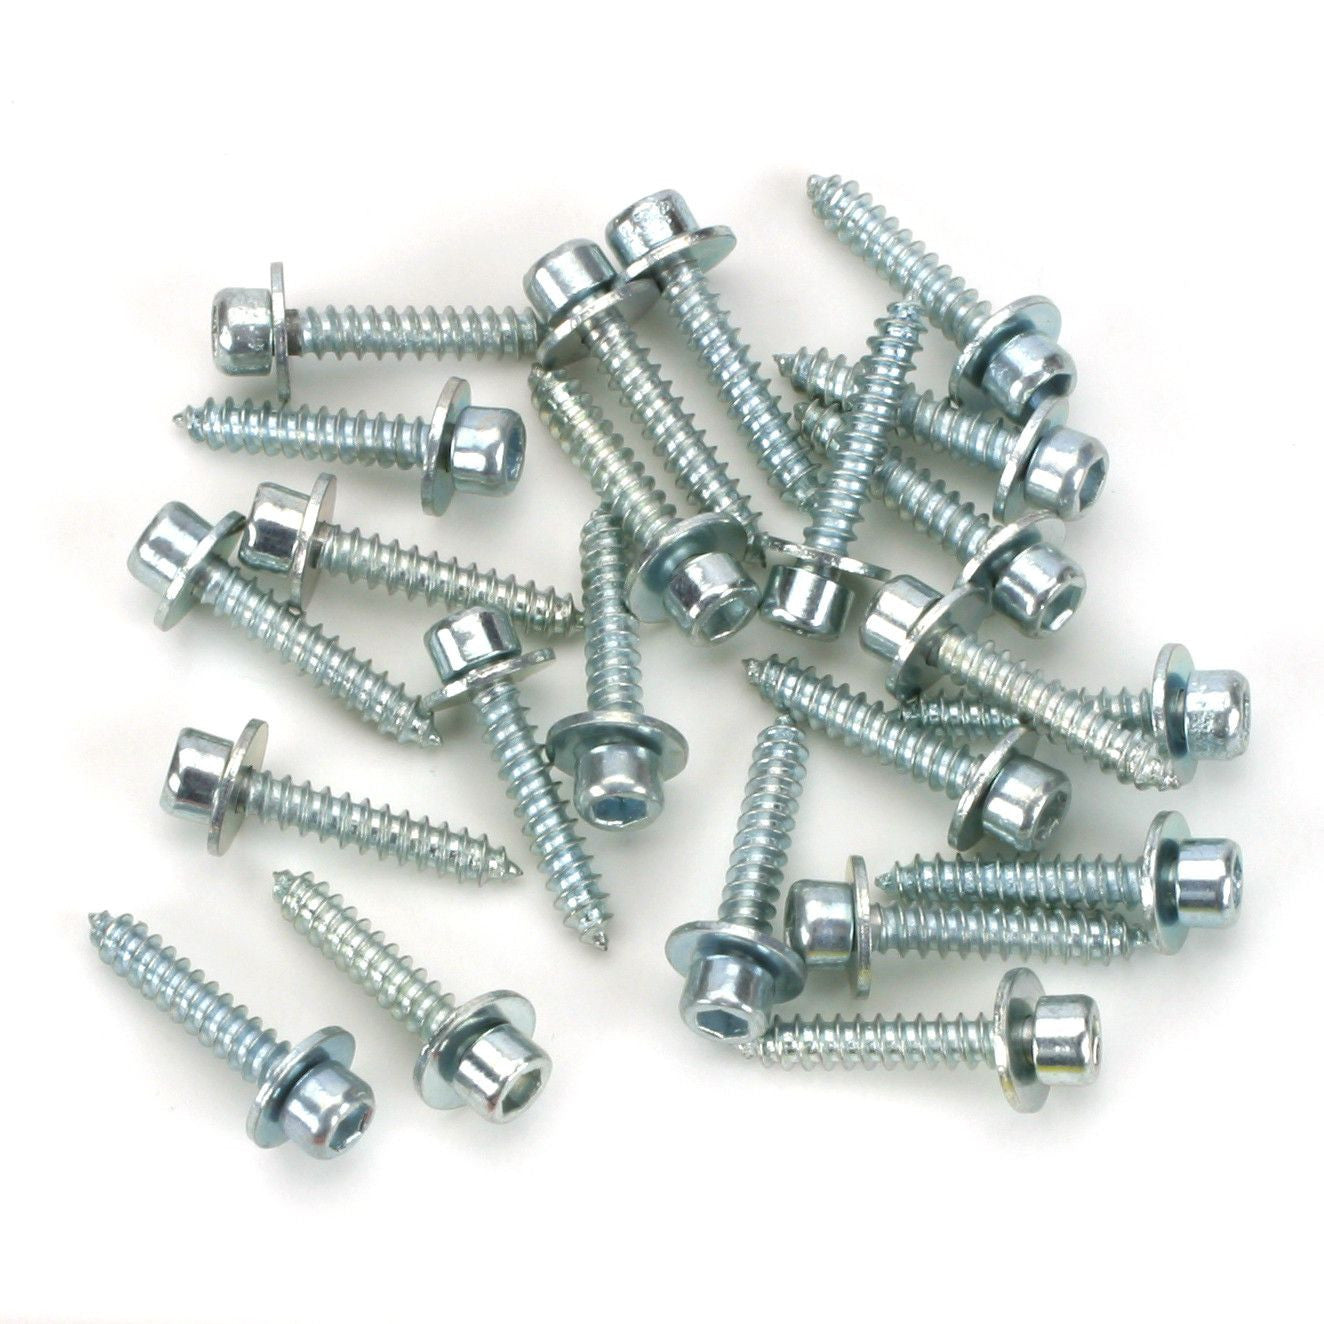 RC-Screws - high quality screw kits for RC-models of any k